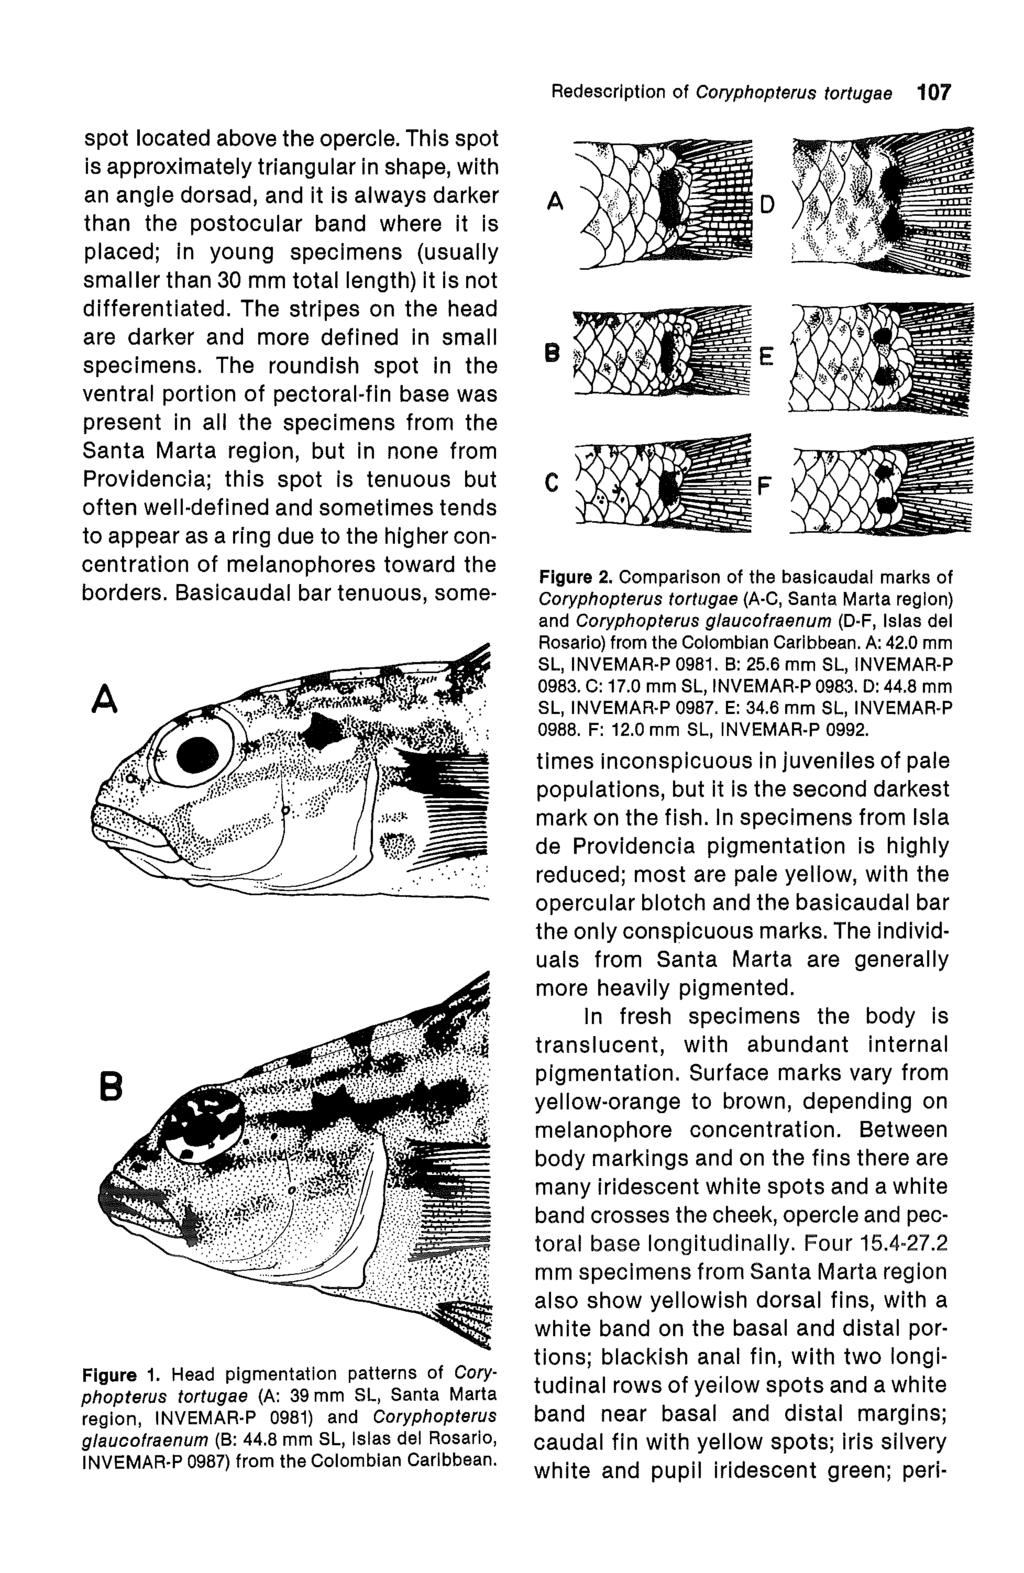 Garzón-Ferreira and Acero P.: Redescription of Coryphopterus tortugae (Jordan) (Osteichthyes: G Redescription of Coryphopterus tortugae 107 spot located above the opercle.